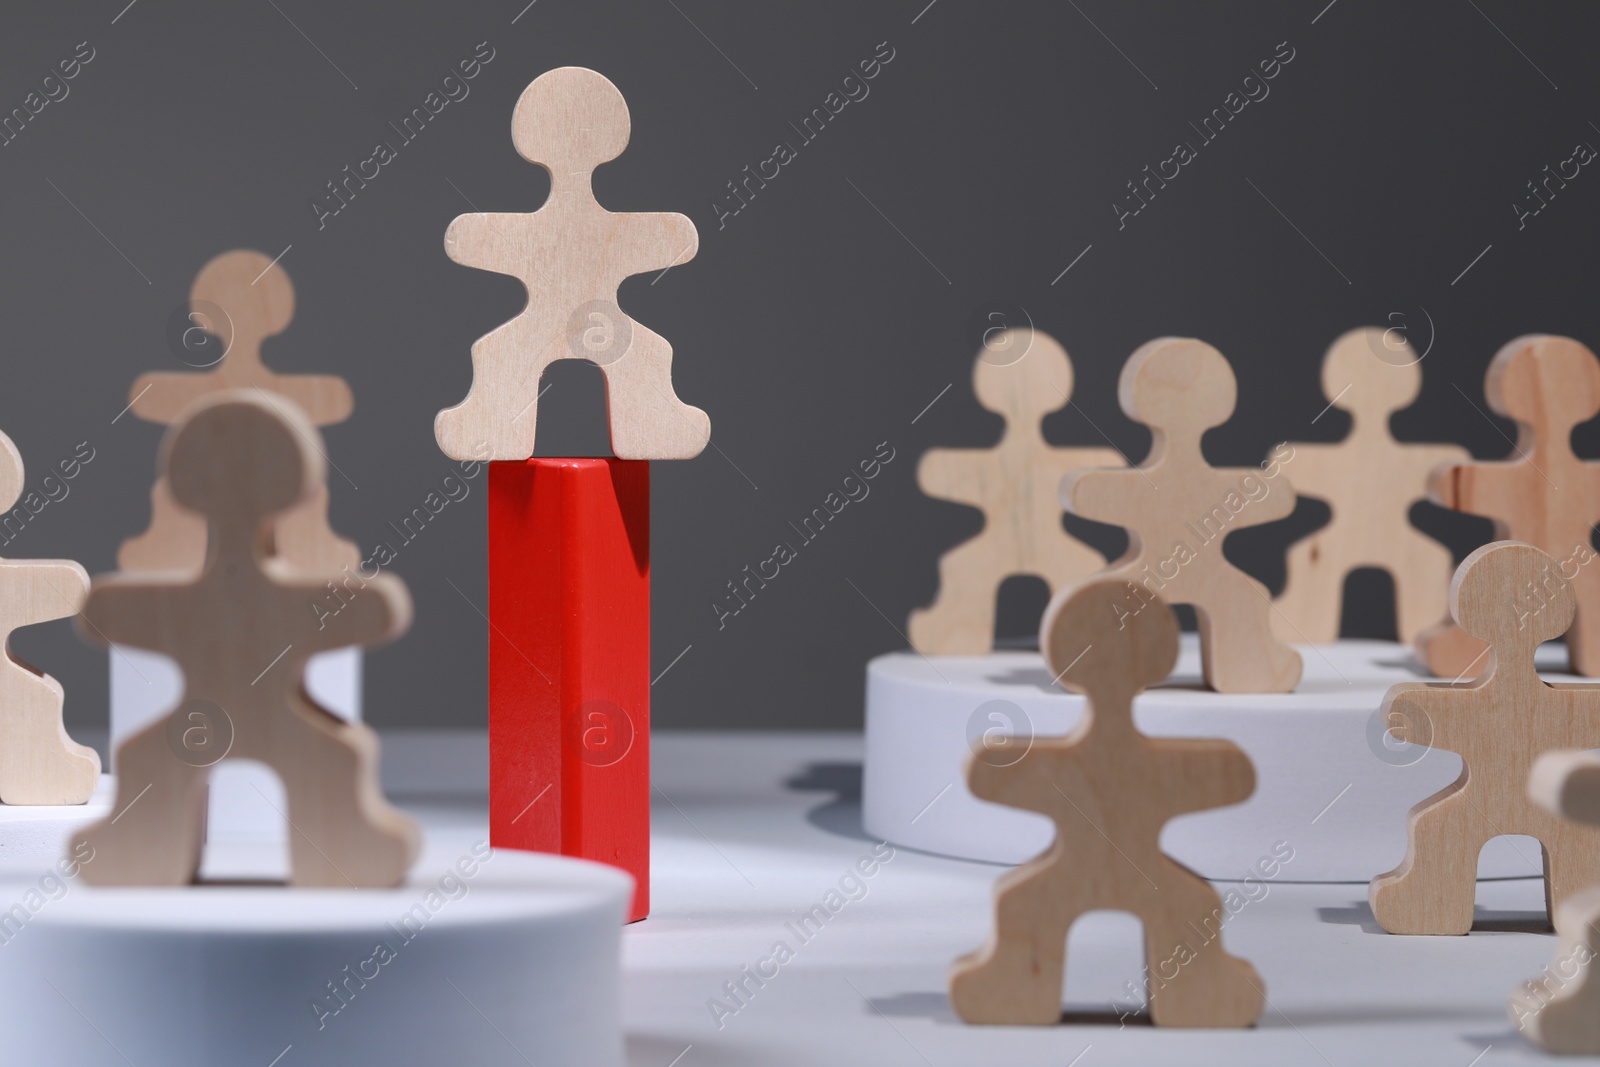 Photo of Recruitment and hiring concept. Human wooden figure on red stand among others on white table